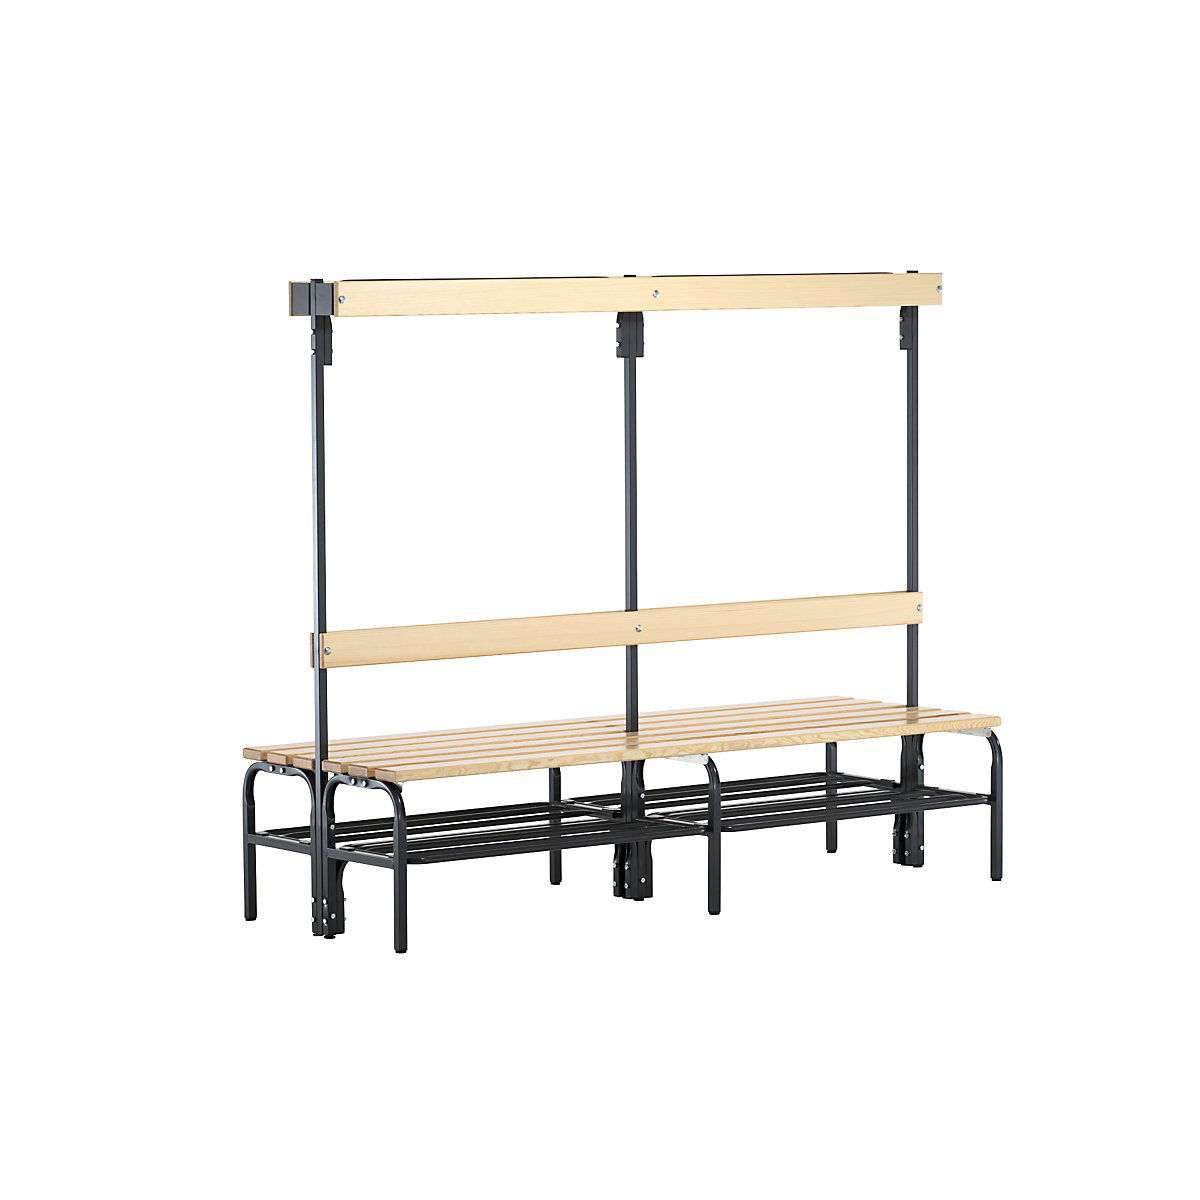 Sypro – Cloakroom bench with hook strips, double-sided, 12 hooks, 2000 mm, charcoal, shoe rack